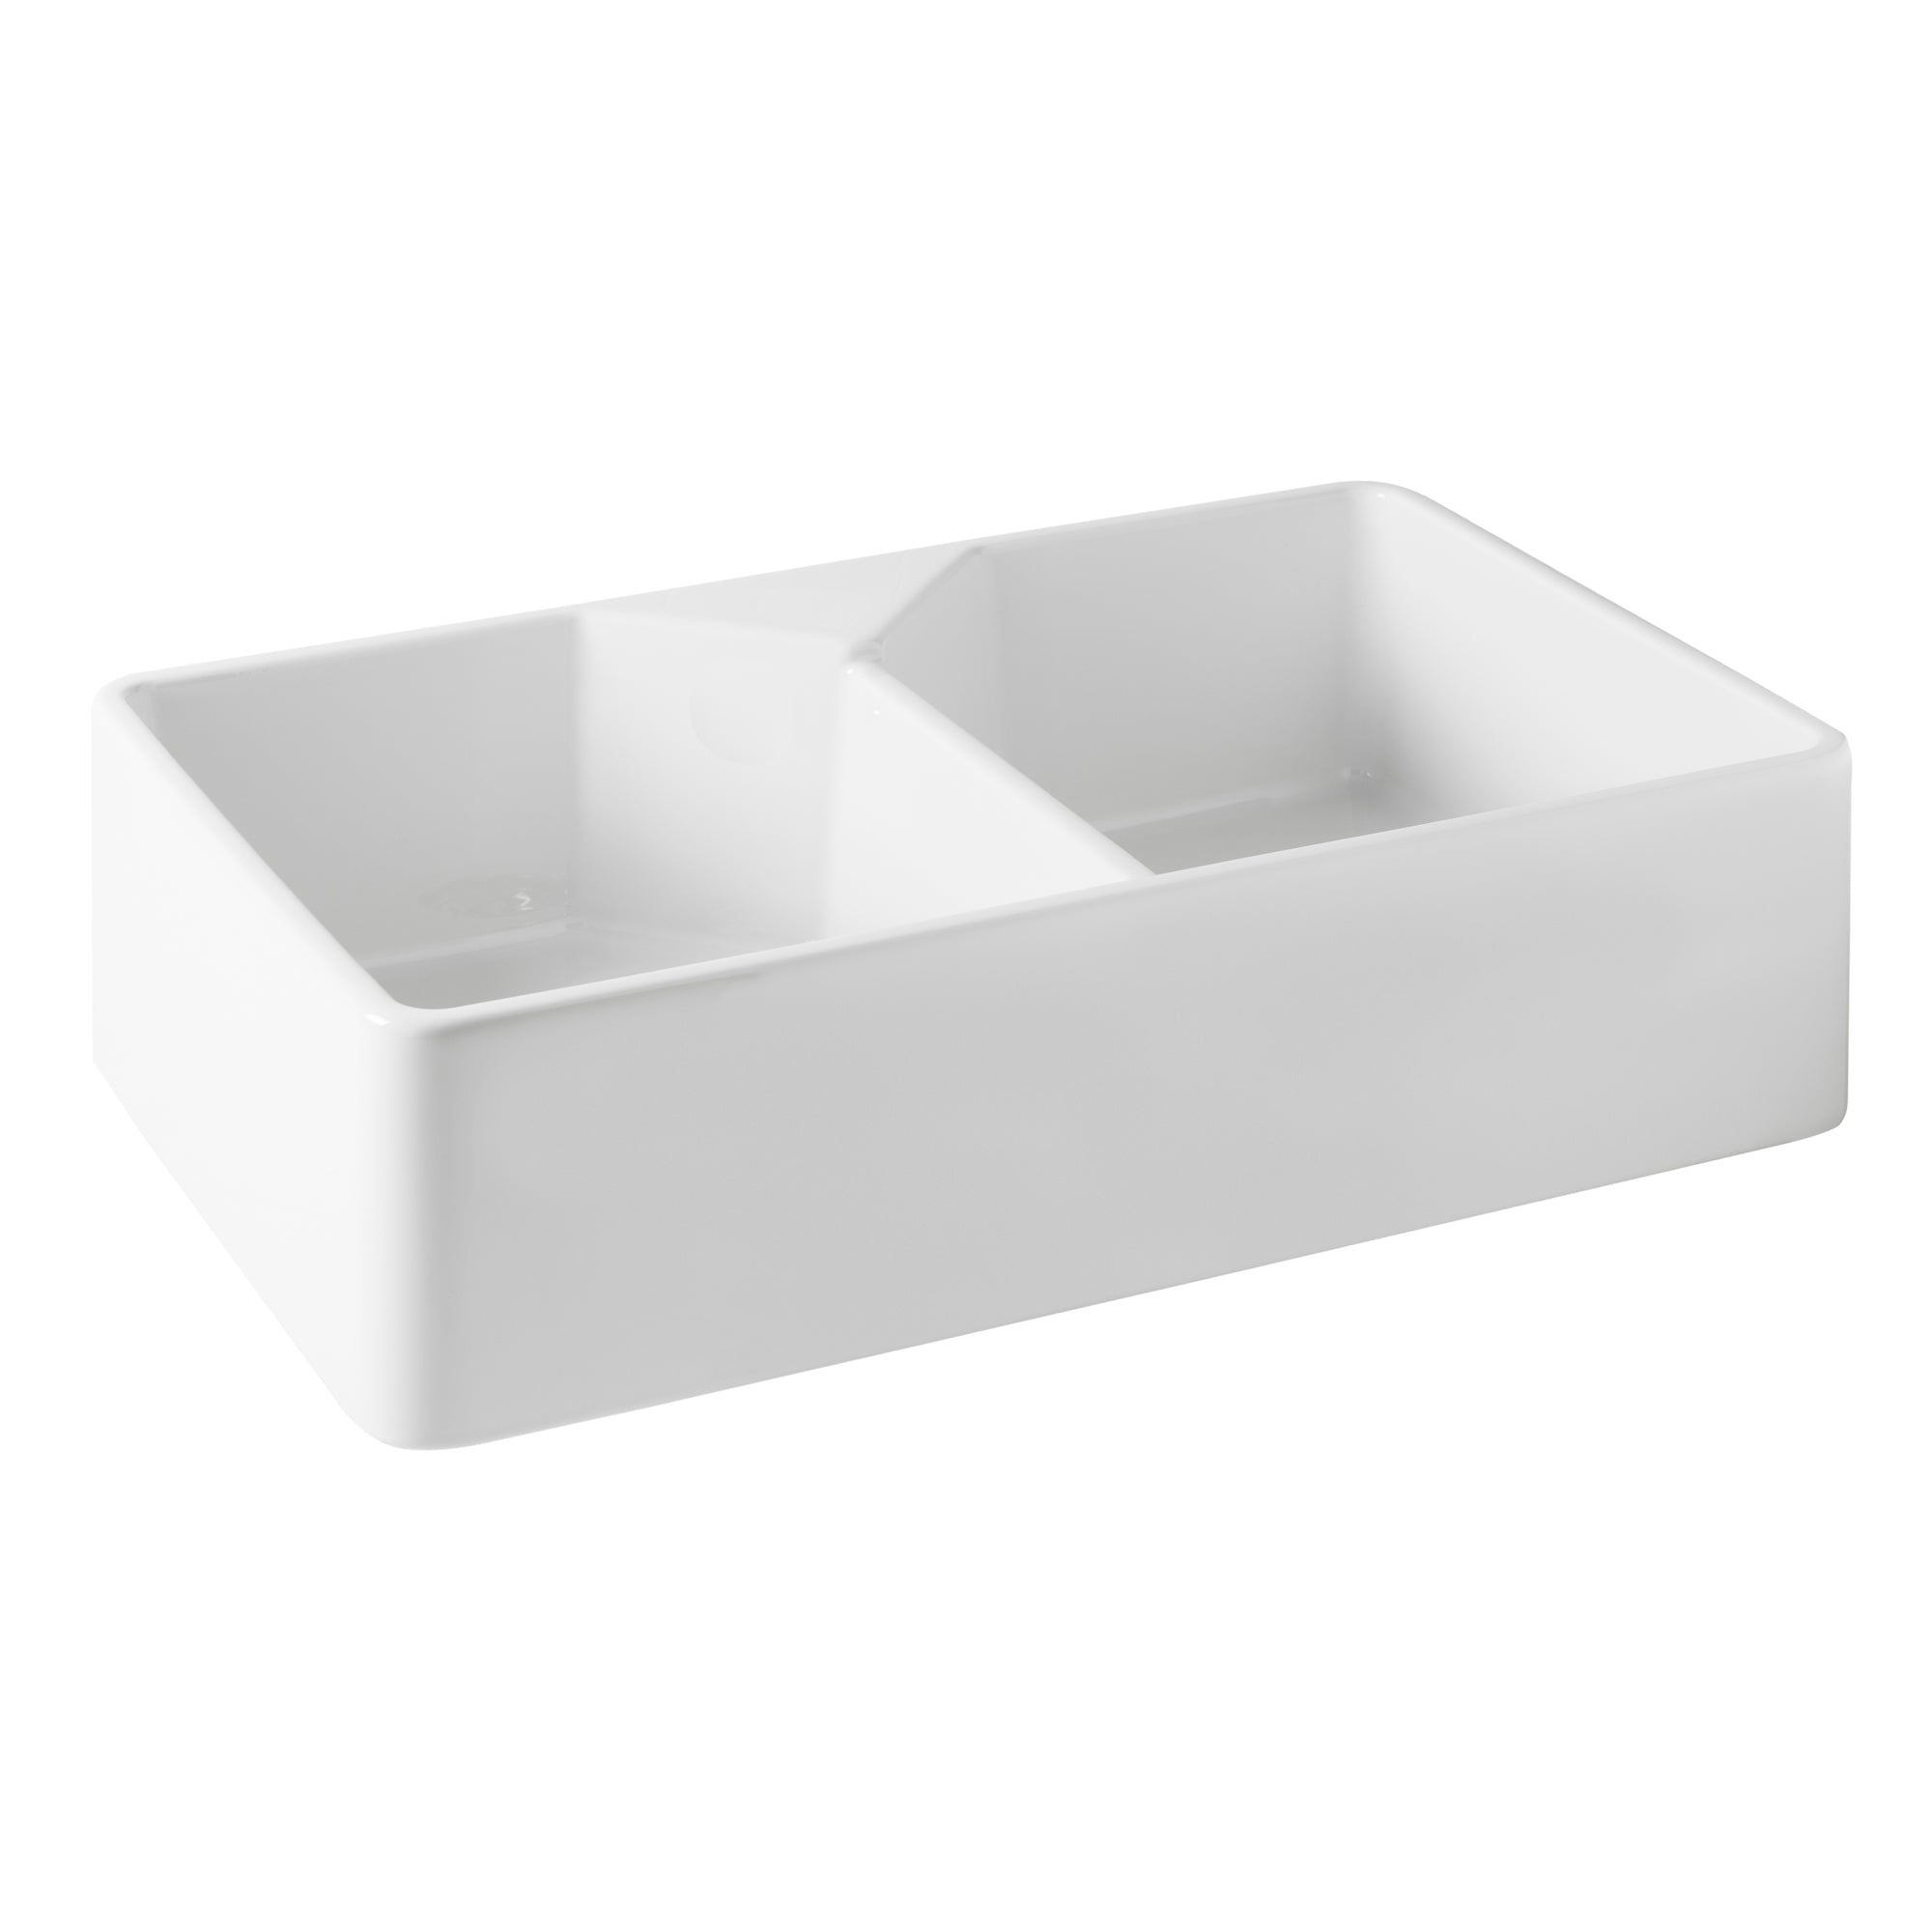 TURNER HASTINGS CHESTER FARMHOUSE DOUBLE BOWL BUTLER SINK WITH ONE TAPHOLE GLOSS WHITE 800MM